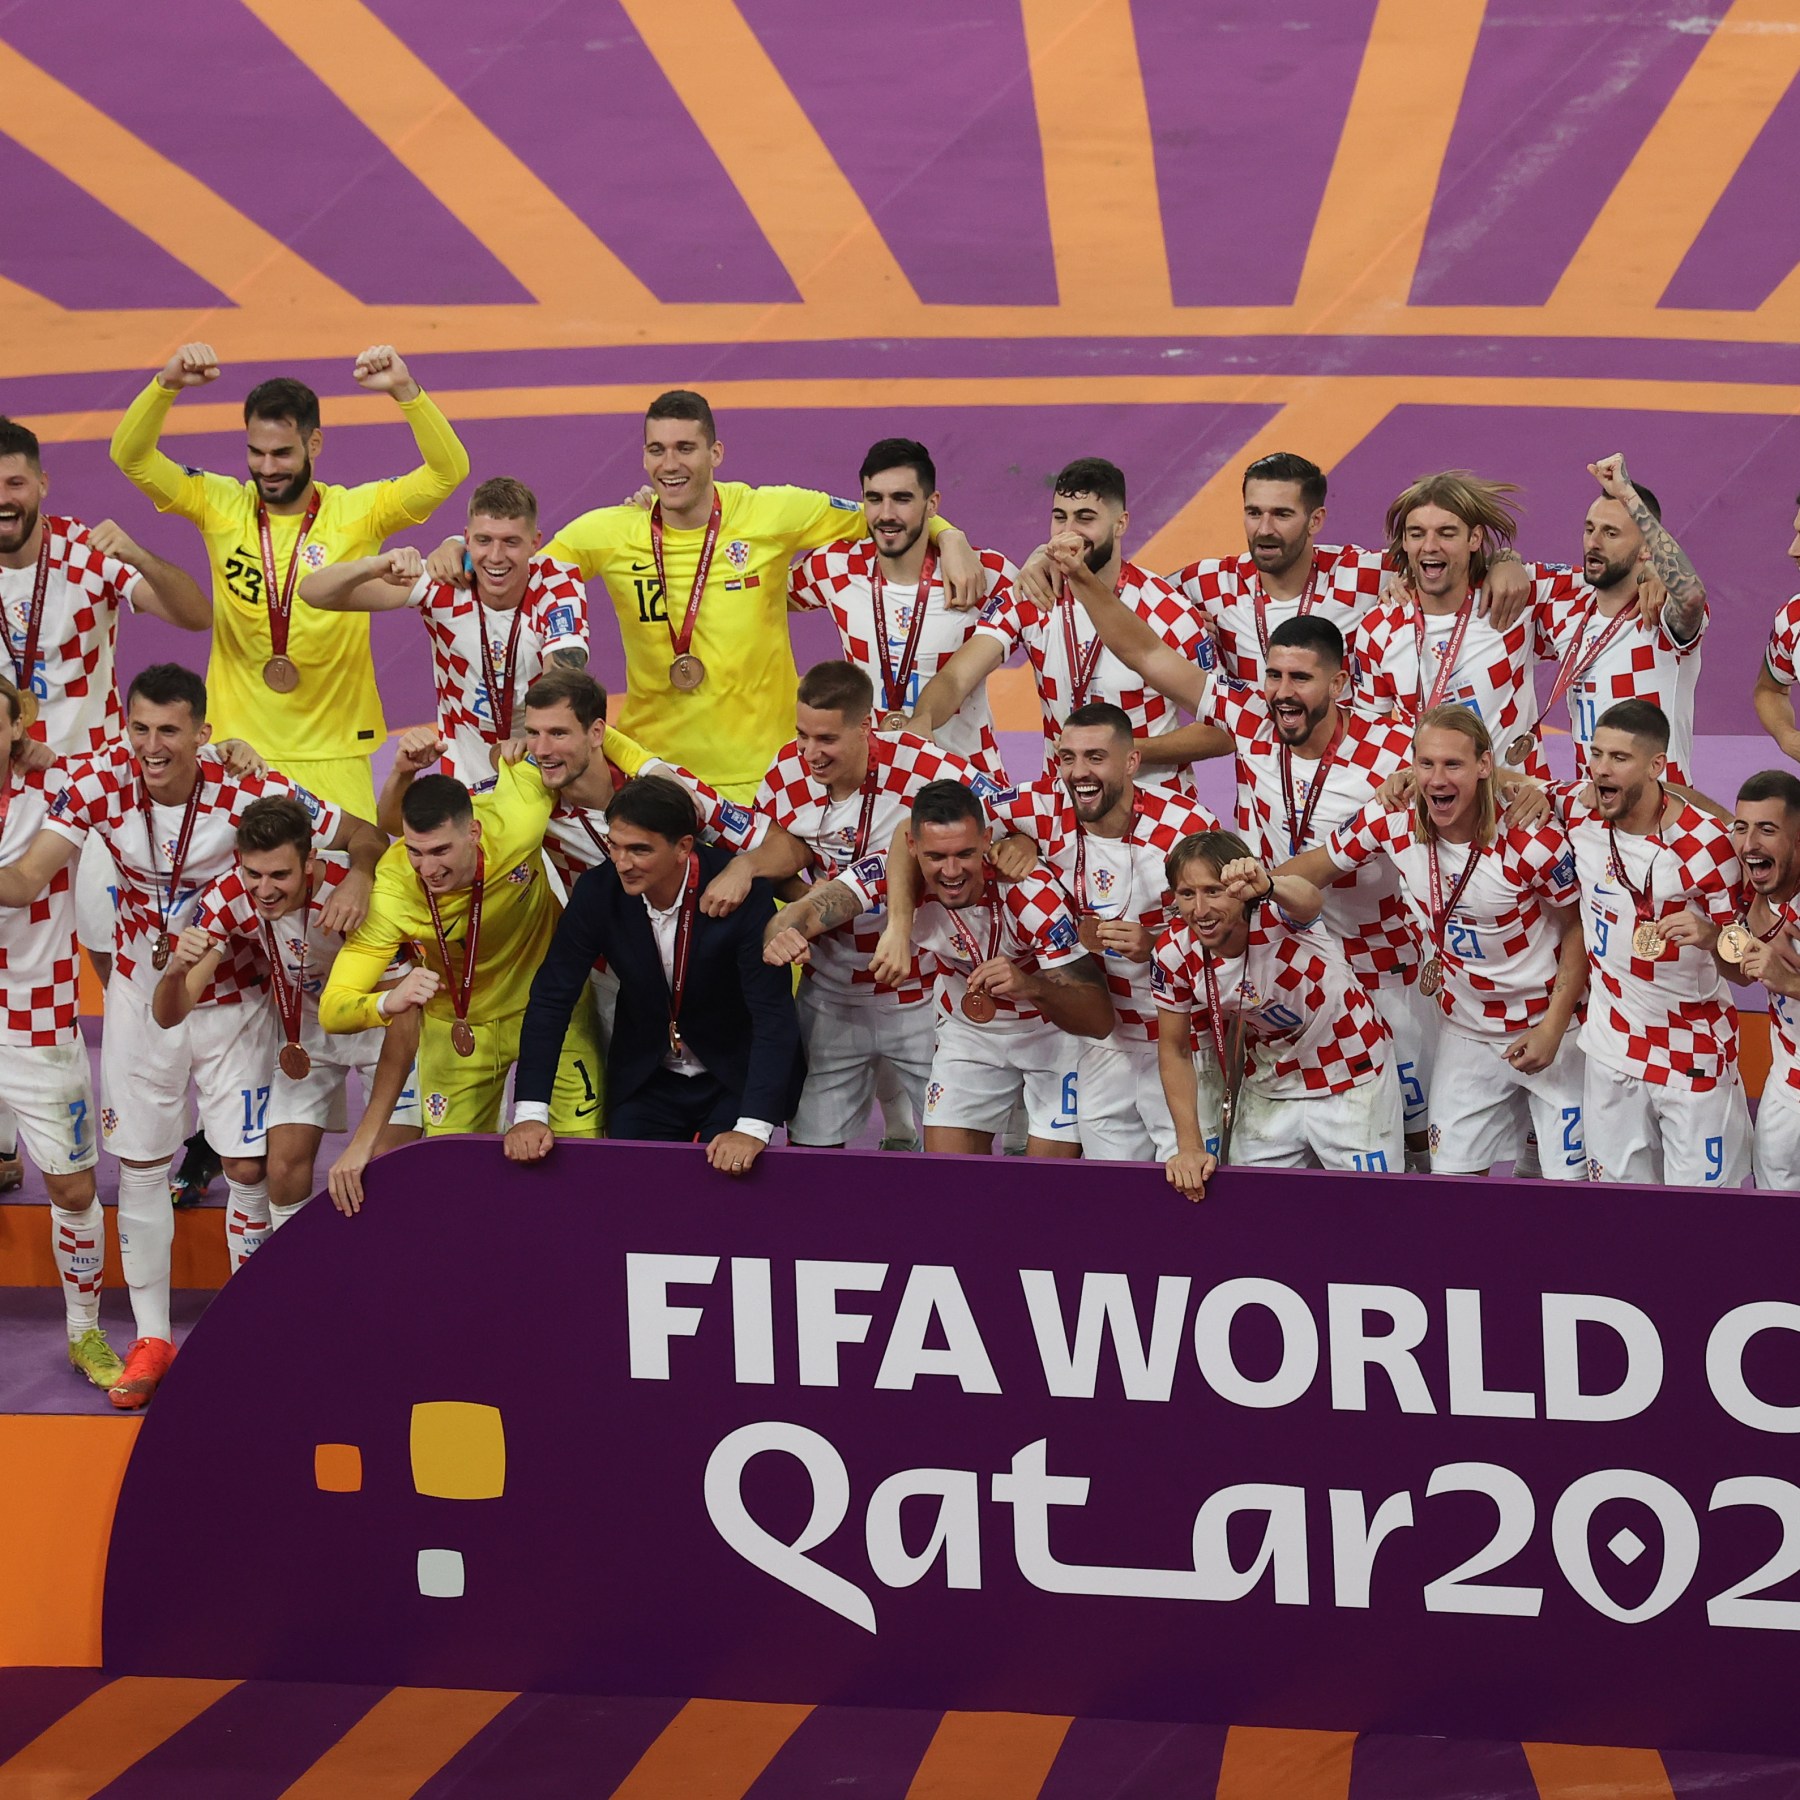 World Cup 2022 in Qatar - Croatia clinch third place with hard-fought  victory over Morocco - Eurosport